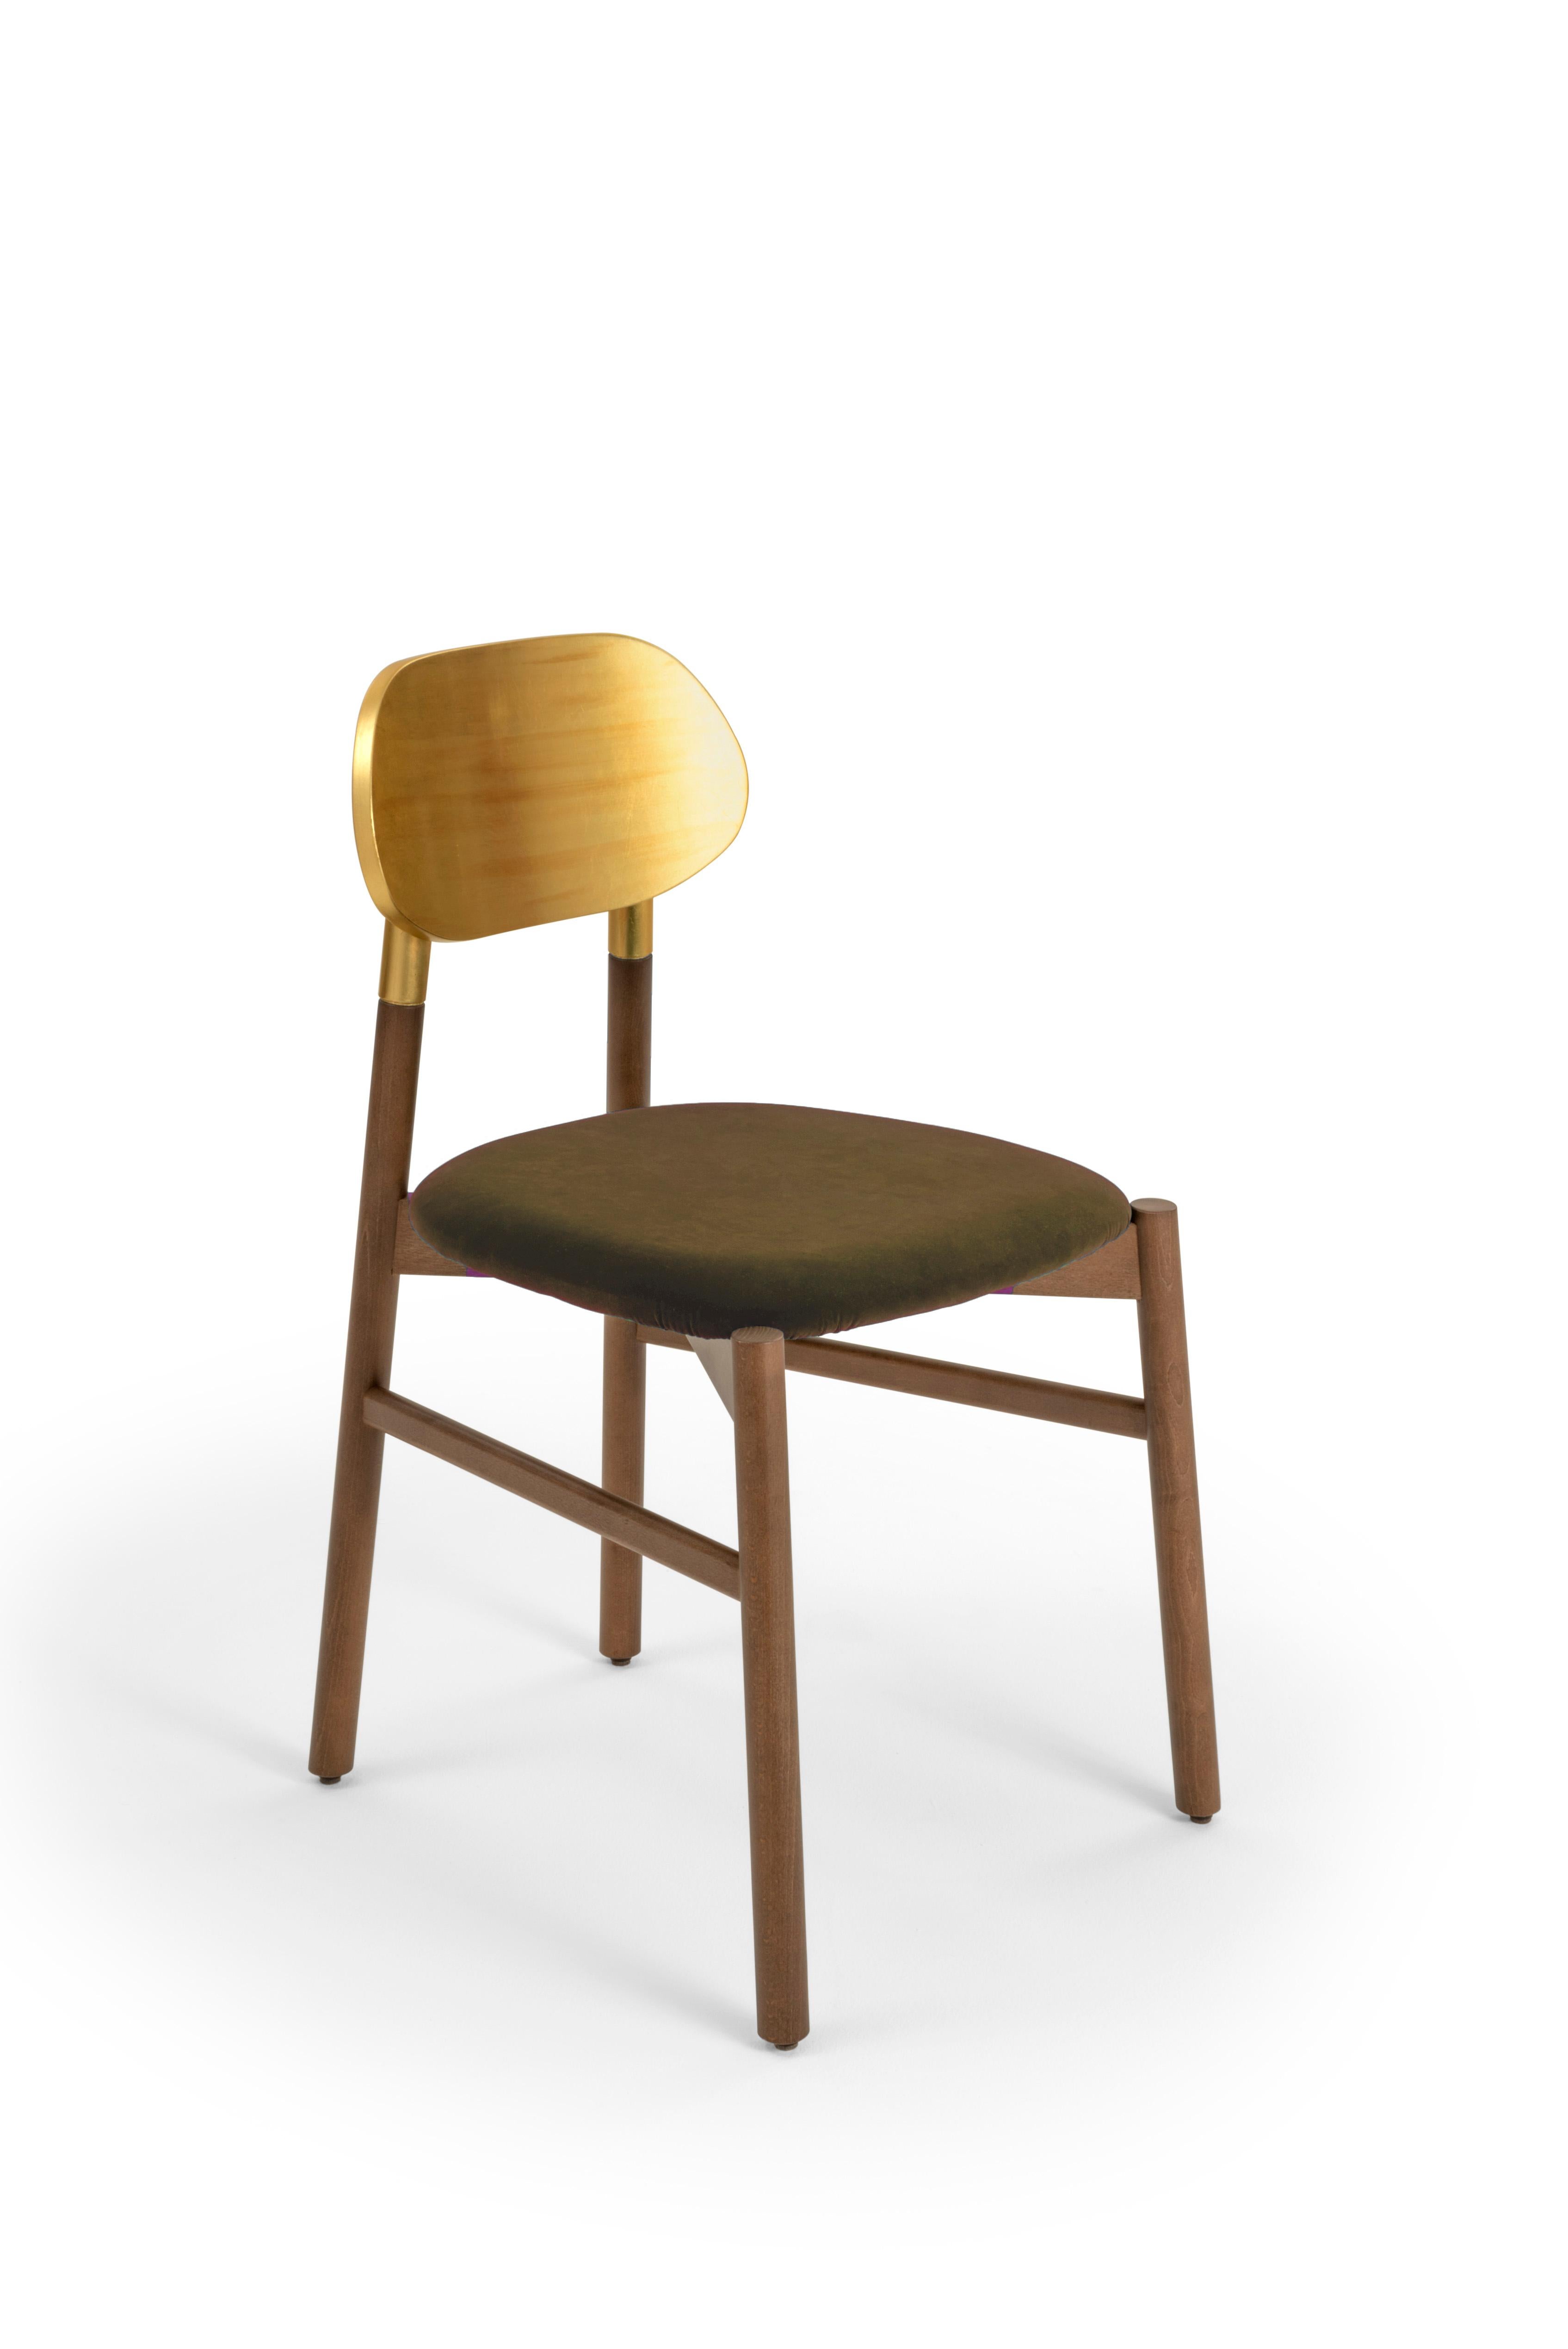 Bokken upholstered chair in walnut stained beechwood, golden leaf backrest and padded seat covered with a top quality Rubelli velvet. Pure Italian quality.
An essential chair in the form, yet precious in colors. Tapered and elongated, the legs of